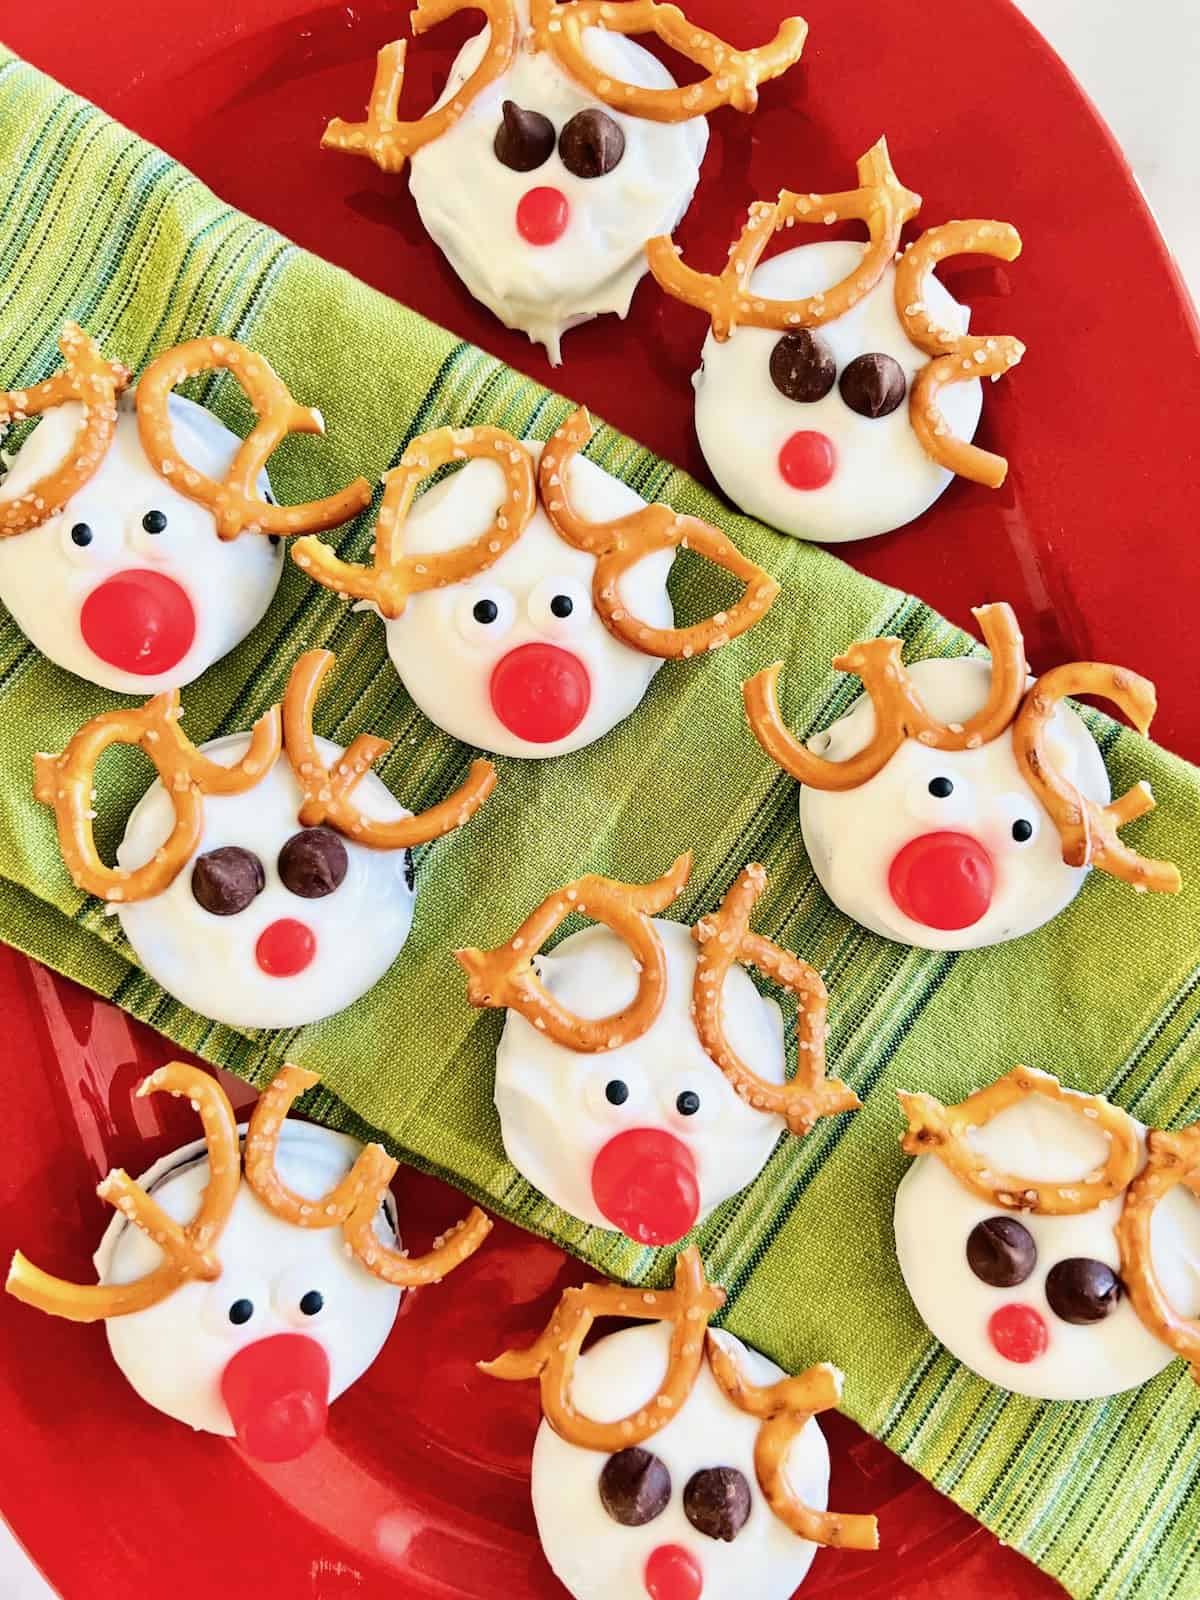 Green napkin over a red Christmas platter displaying Oreo Rudolph cookies.